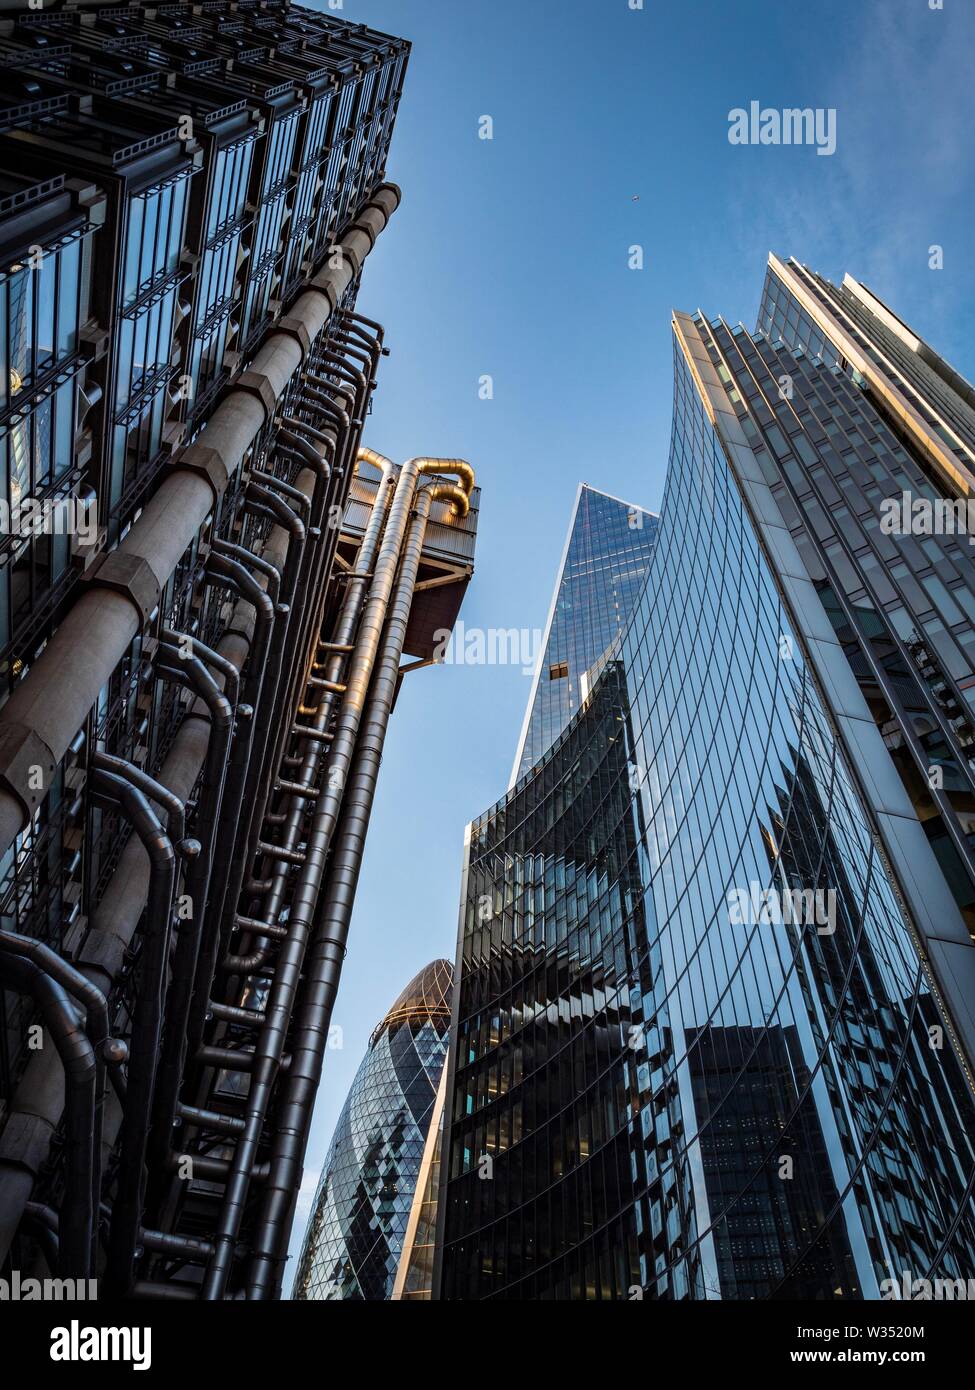 The golden hues of sunset on the outside of the Lloyds of London building Stock Photo